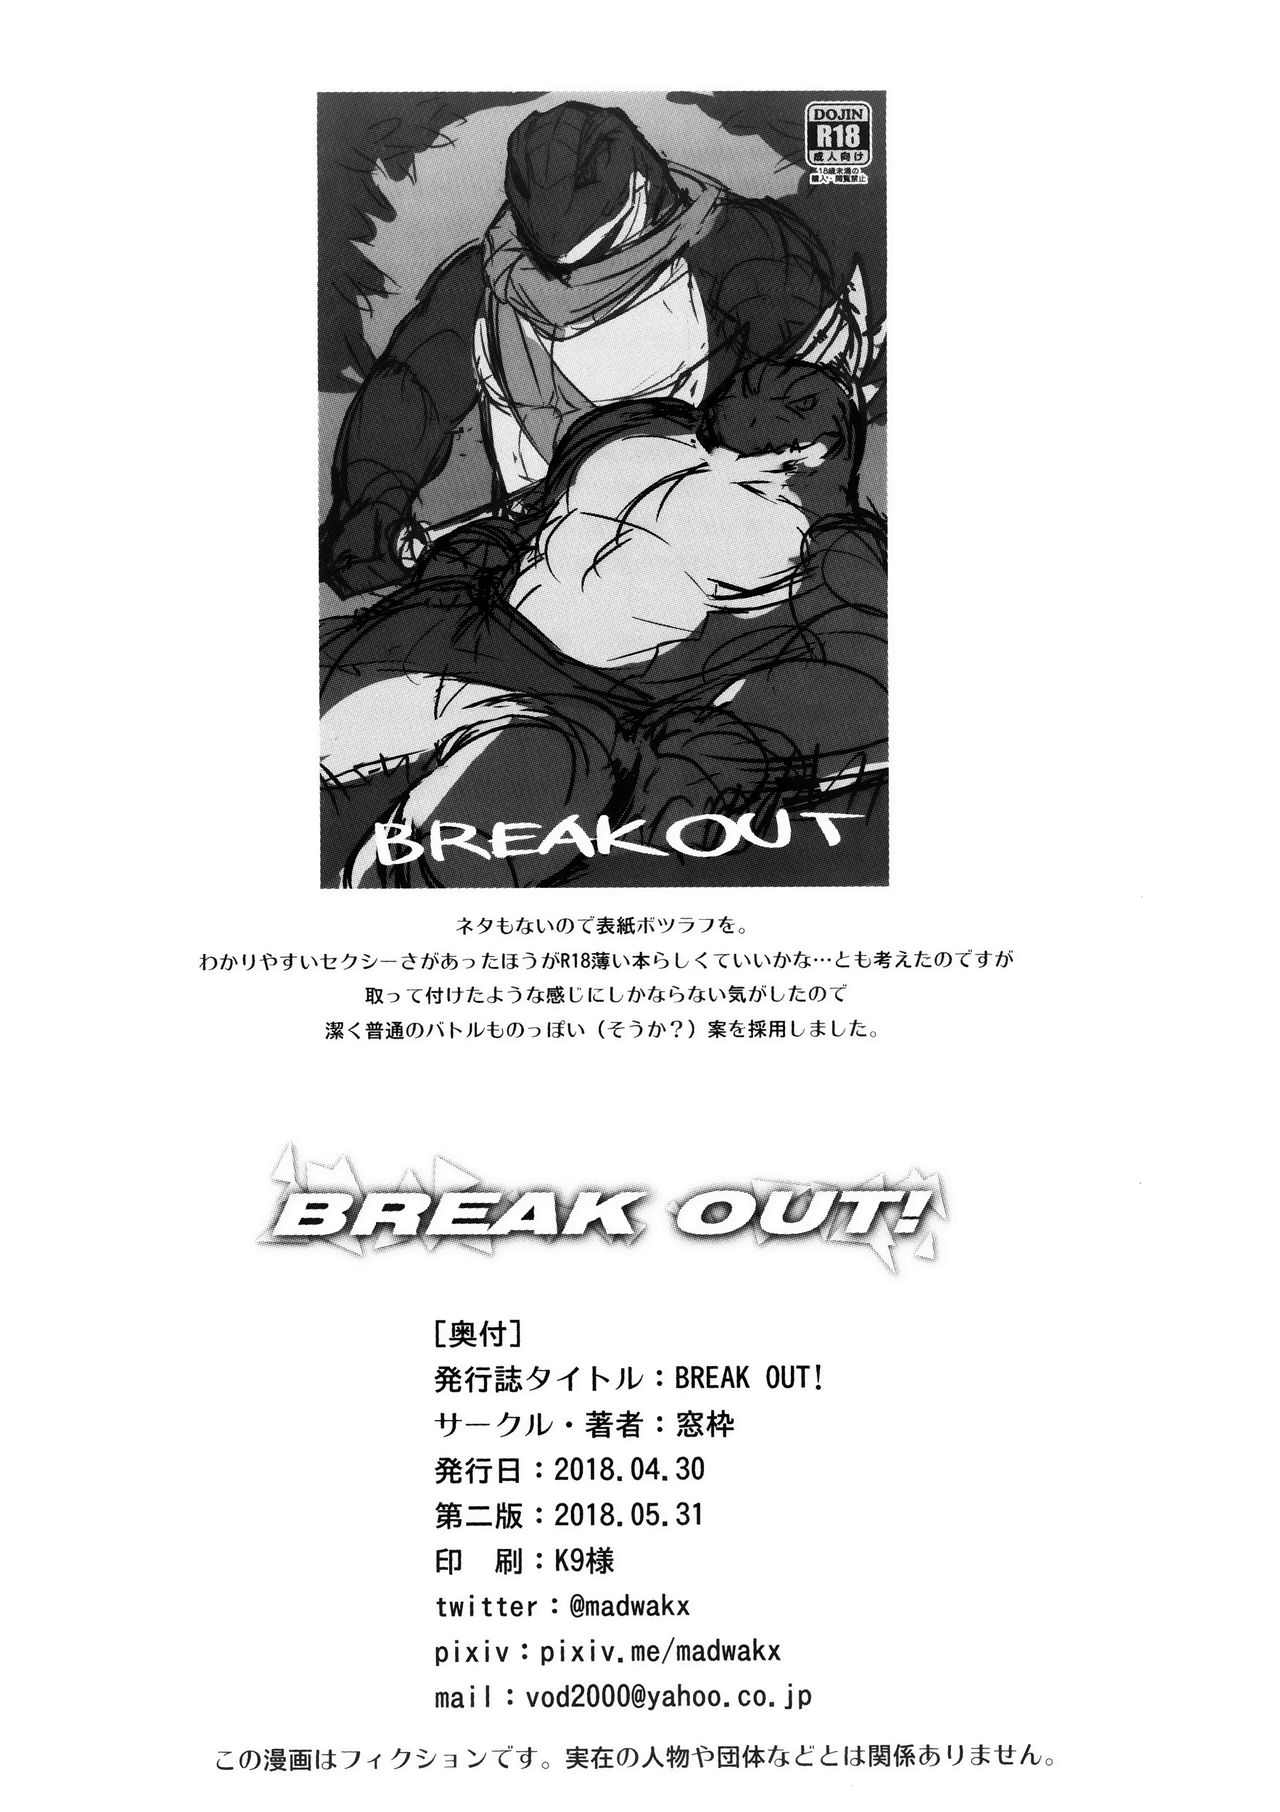 [Madwak] BREAK OUT! (Overlord) [Chinese] [隼翼橫空] [Colorized] [2018-05-31] [窓枠] BREAK OUT! (オーバーロード) [中国翻訳] [カラー化] [2018年5月31日]